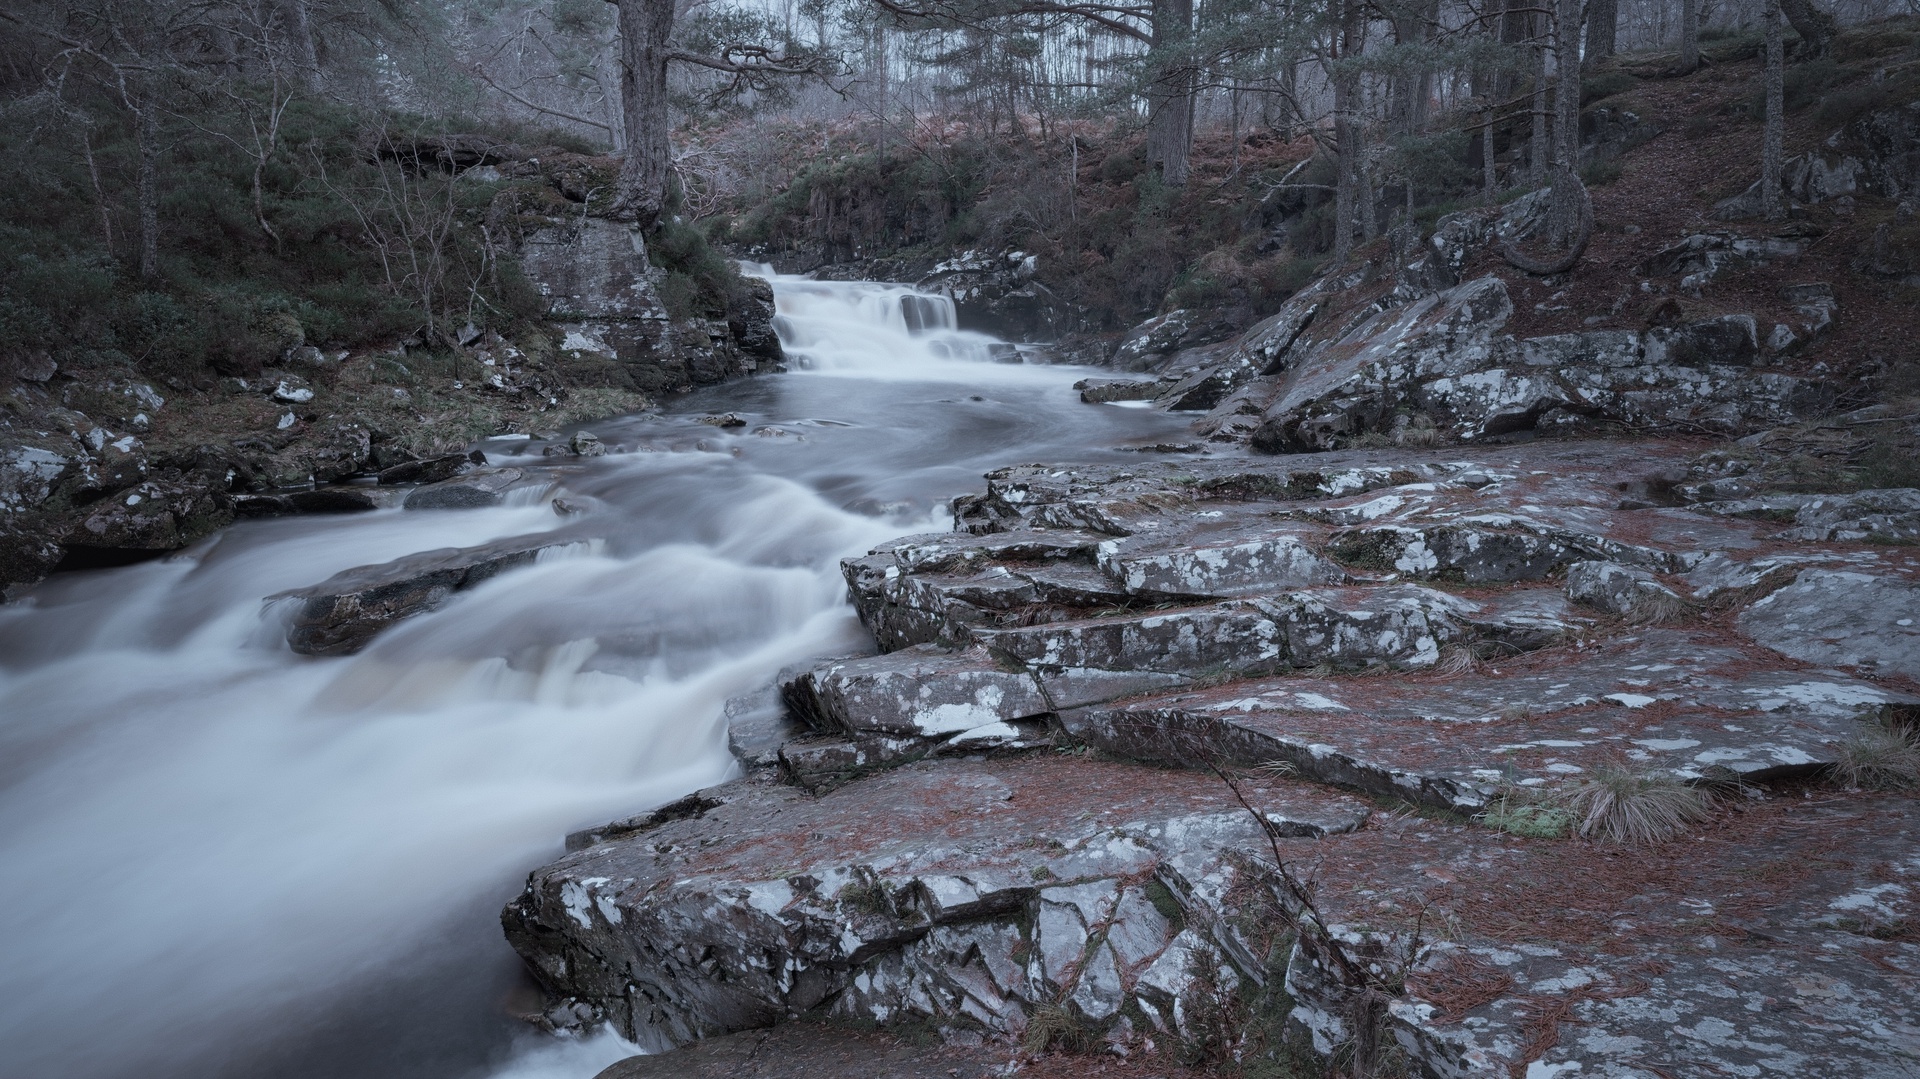 Display image: In the Allt Camghouran Gorge